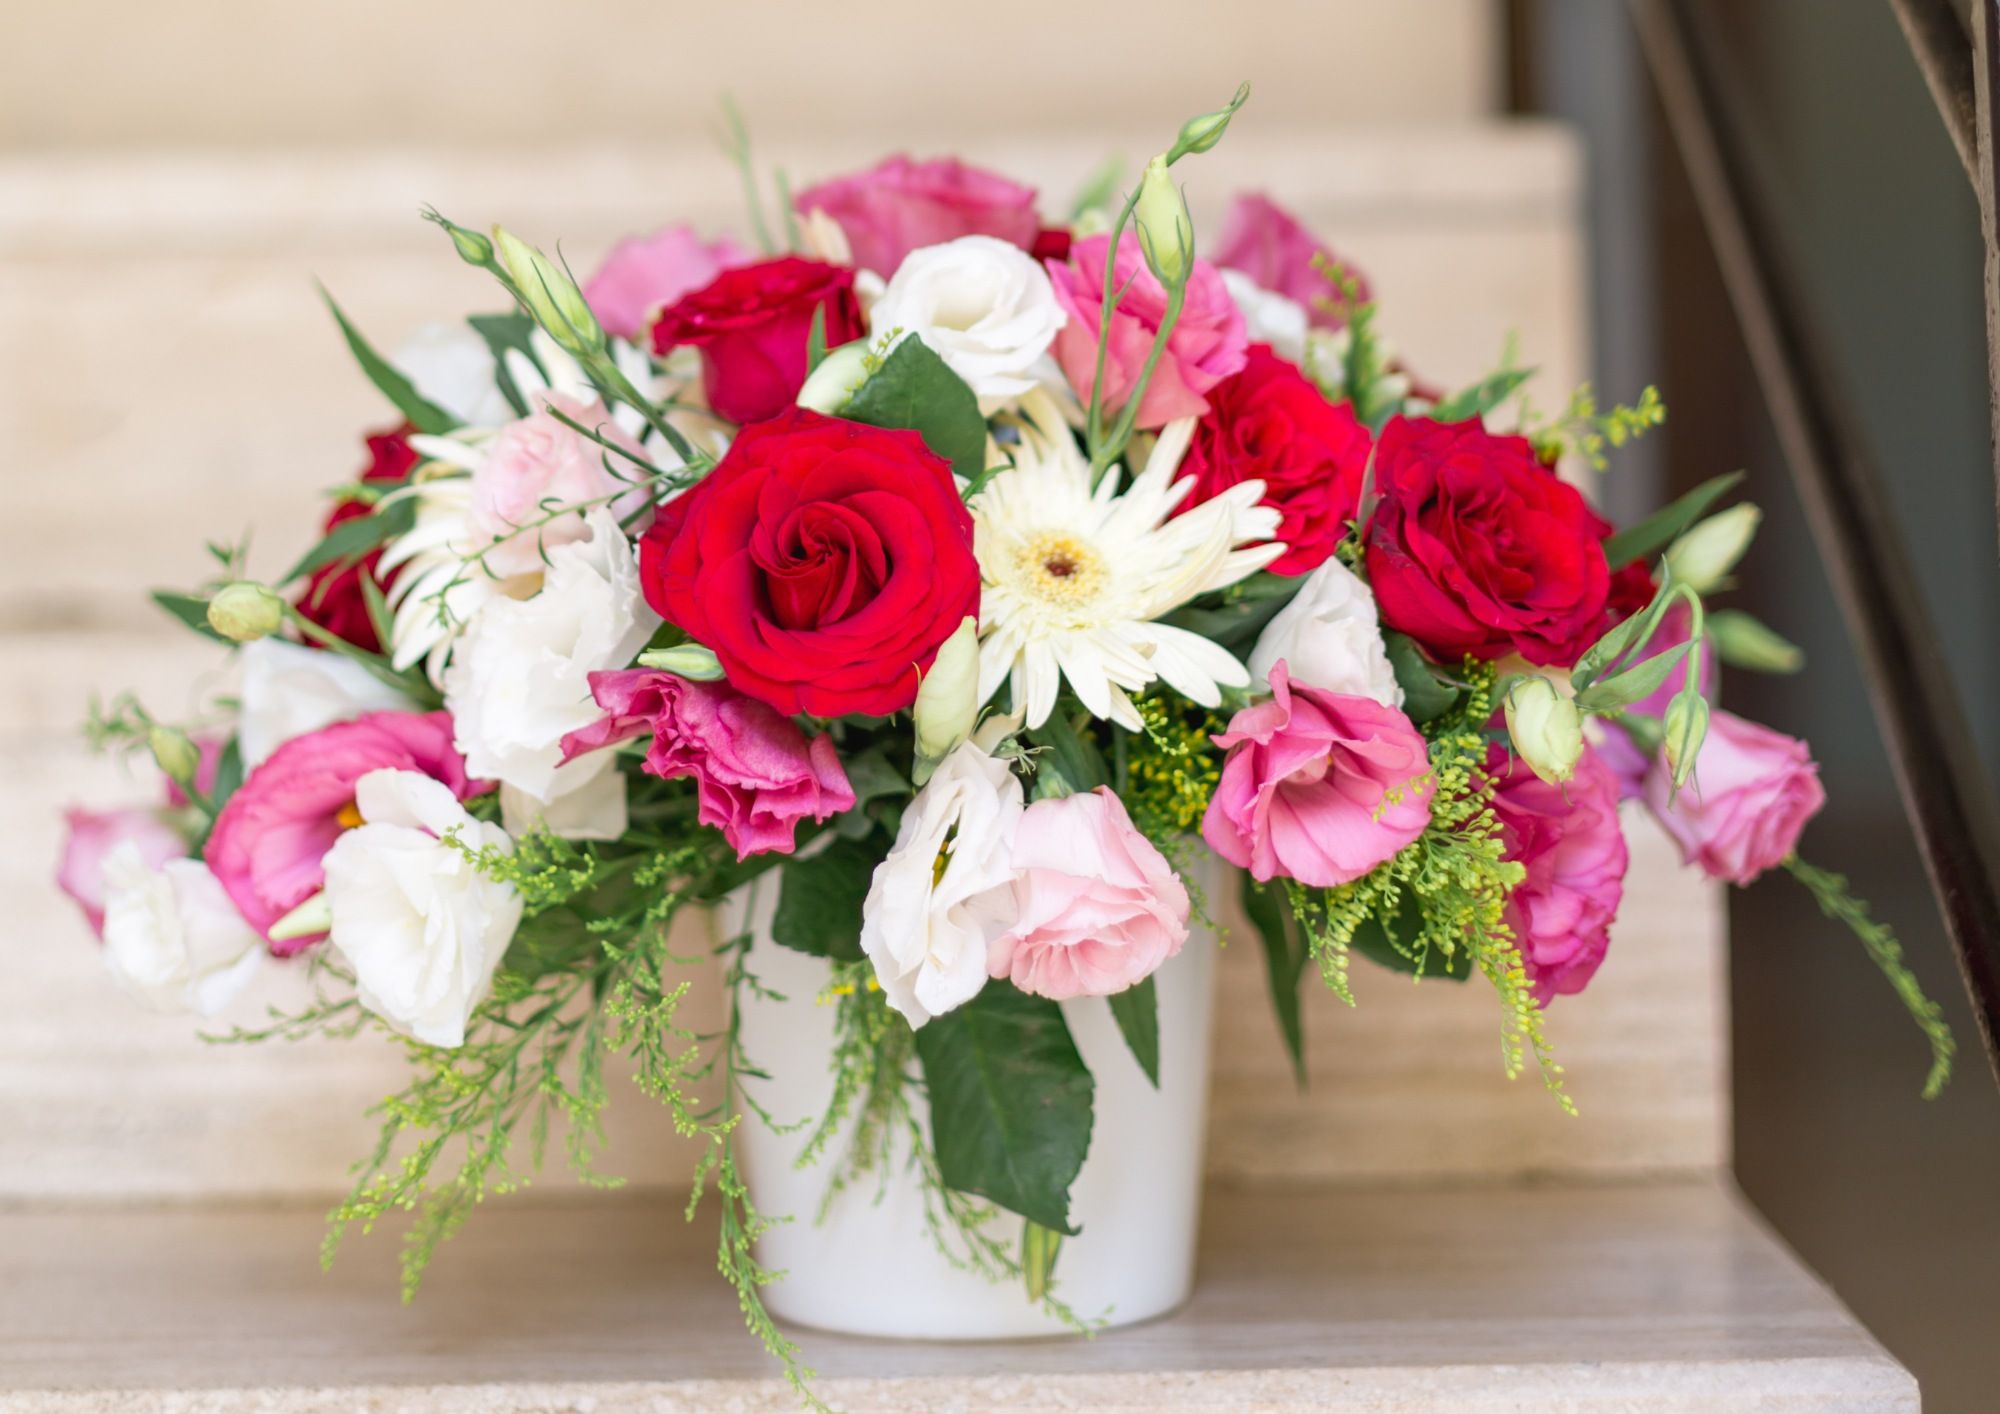 Best Flower Delivery Subscription Services In Dubai